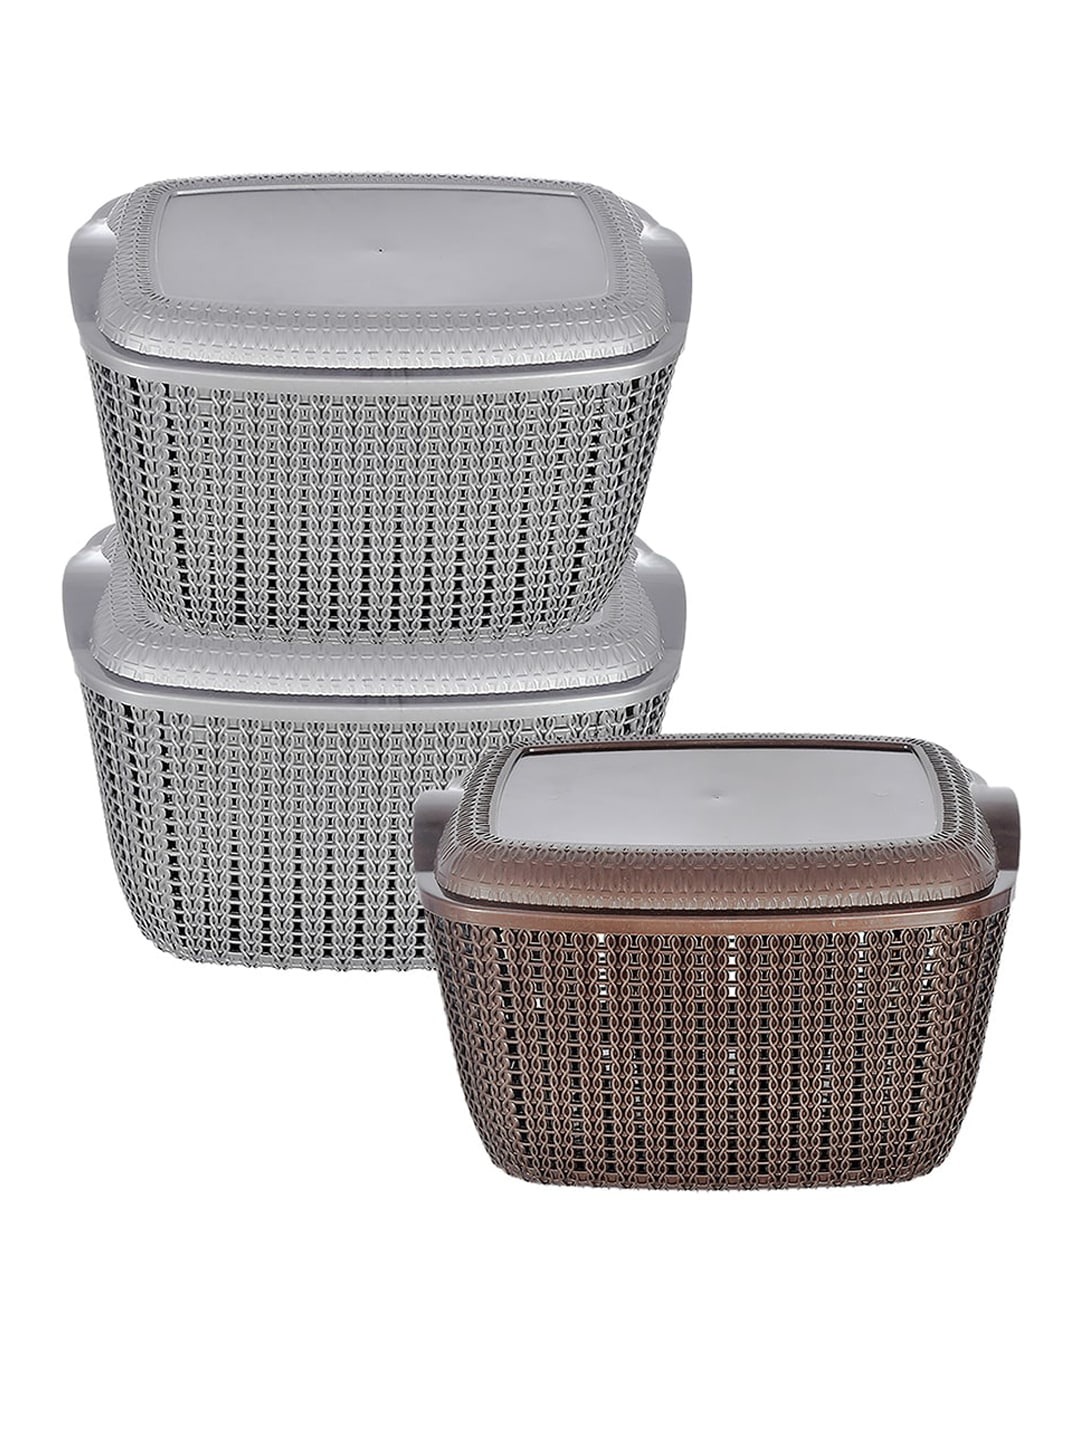 Kuber Industries Set Of 3 Textured Plastic Baskets With Lids Price in India